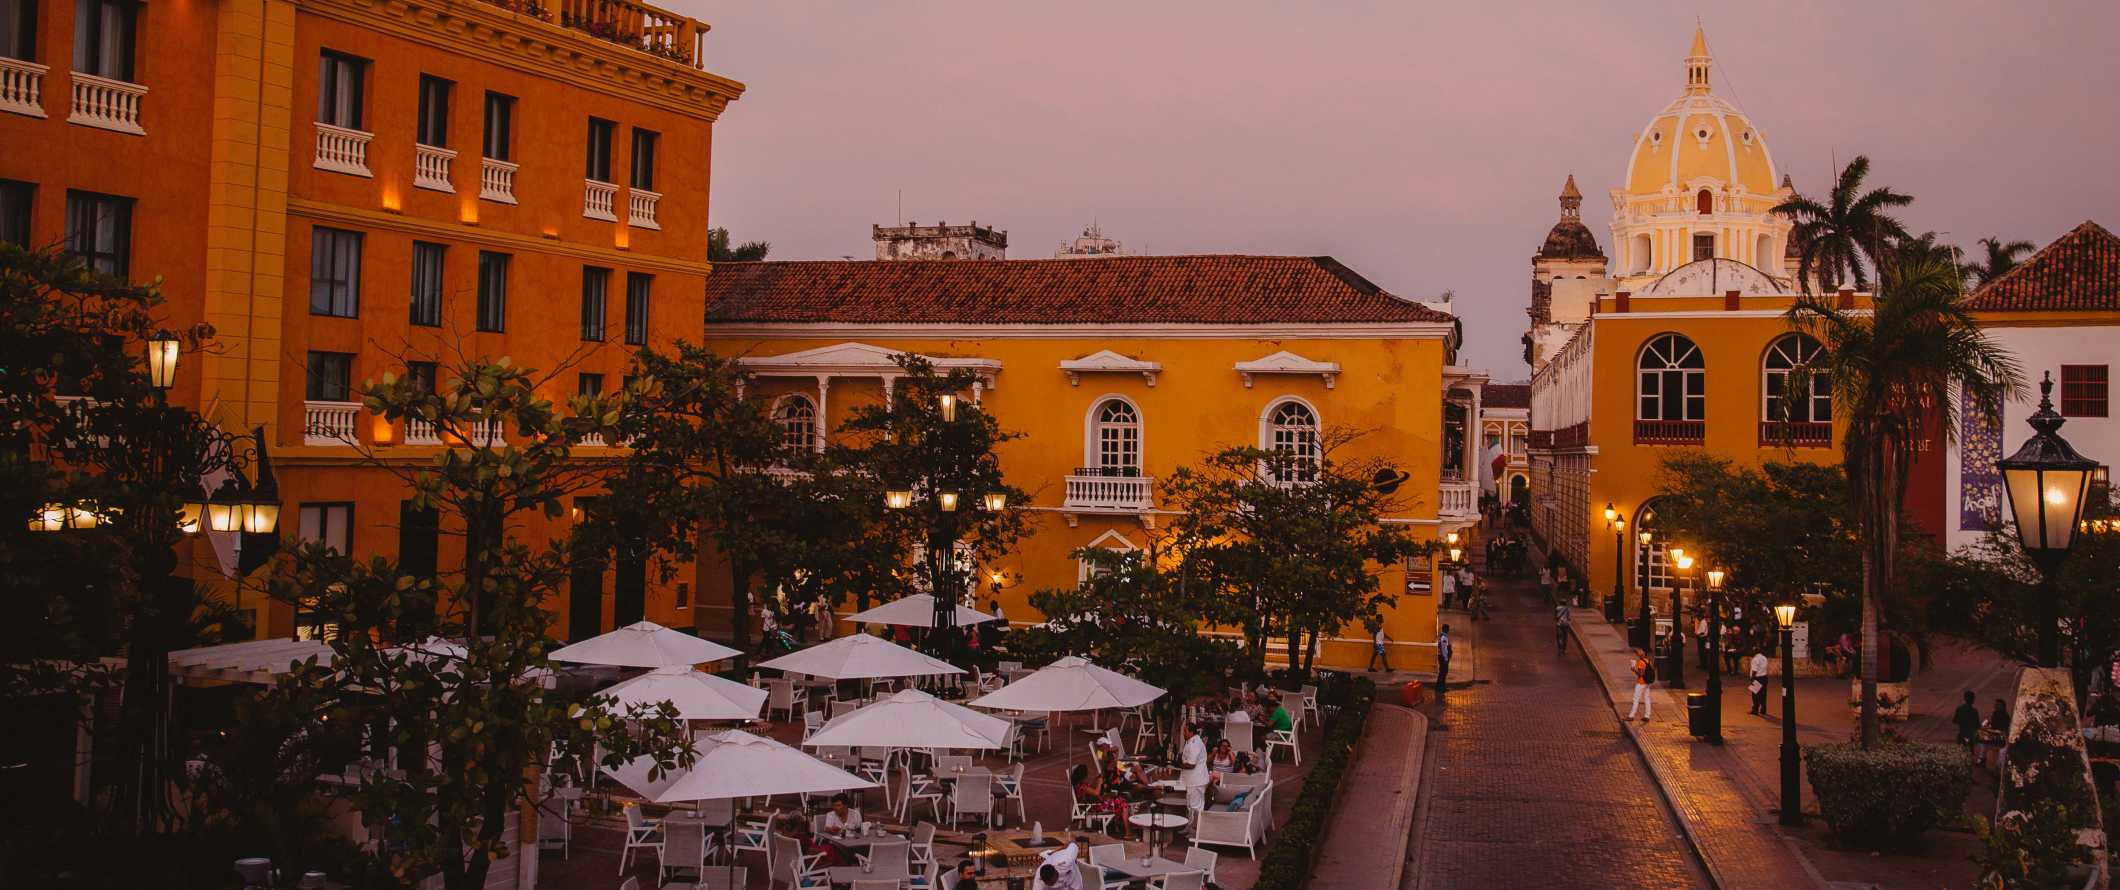 A square in the old town of Cartagena, Colombia at sunset